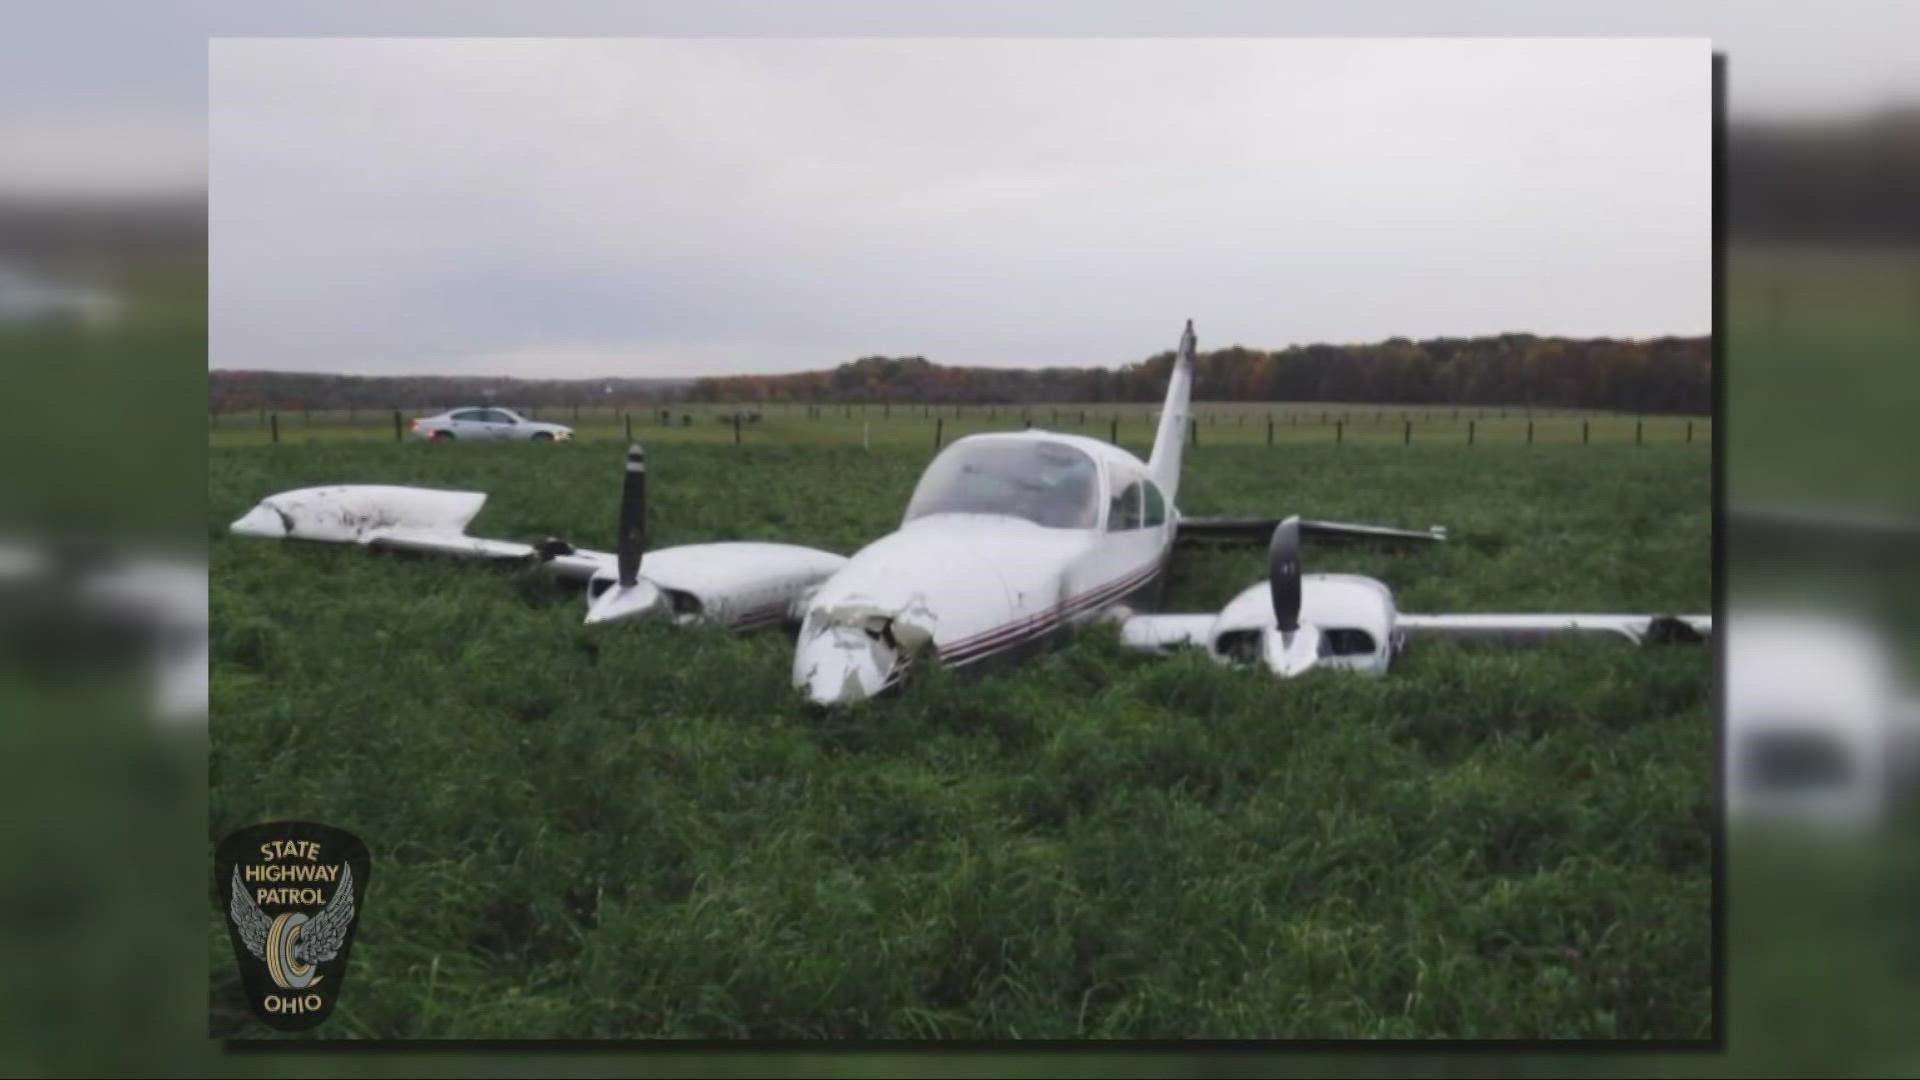 No one was injured in the crash. The aircraft was disabled and several fences on the property were destroyed as a result of the landing.